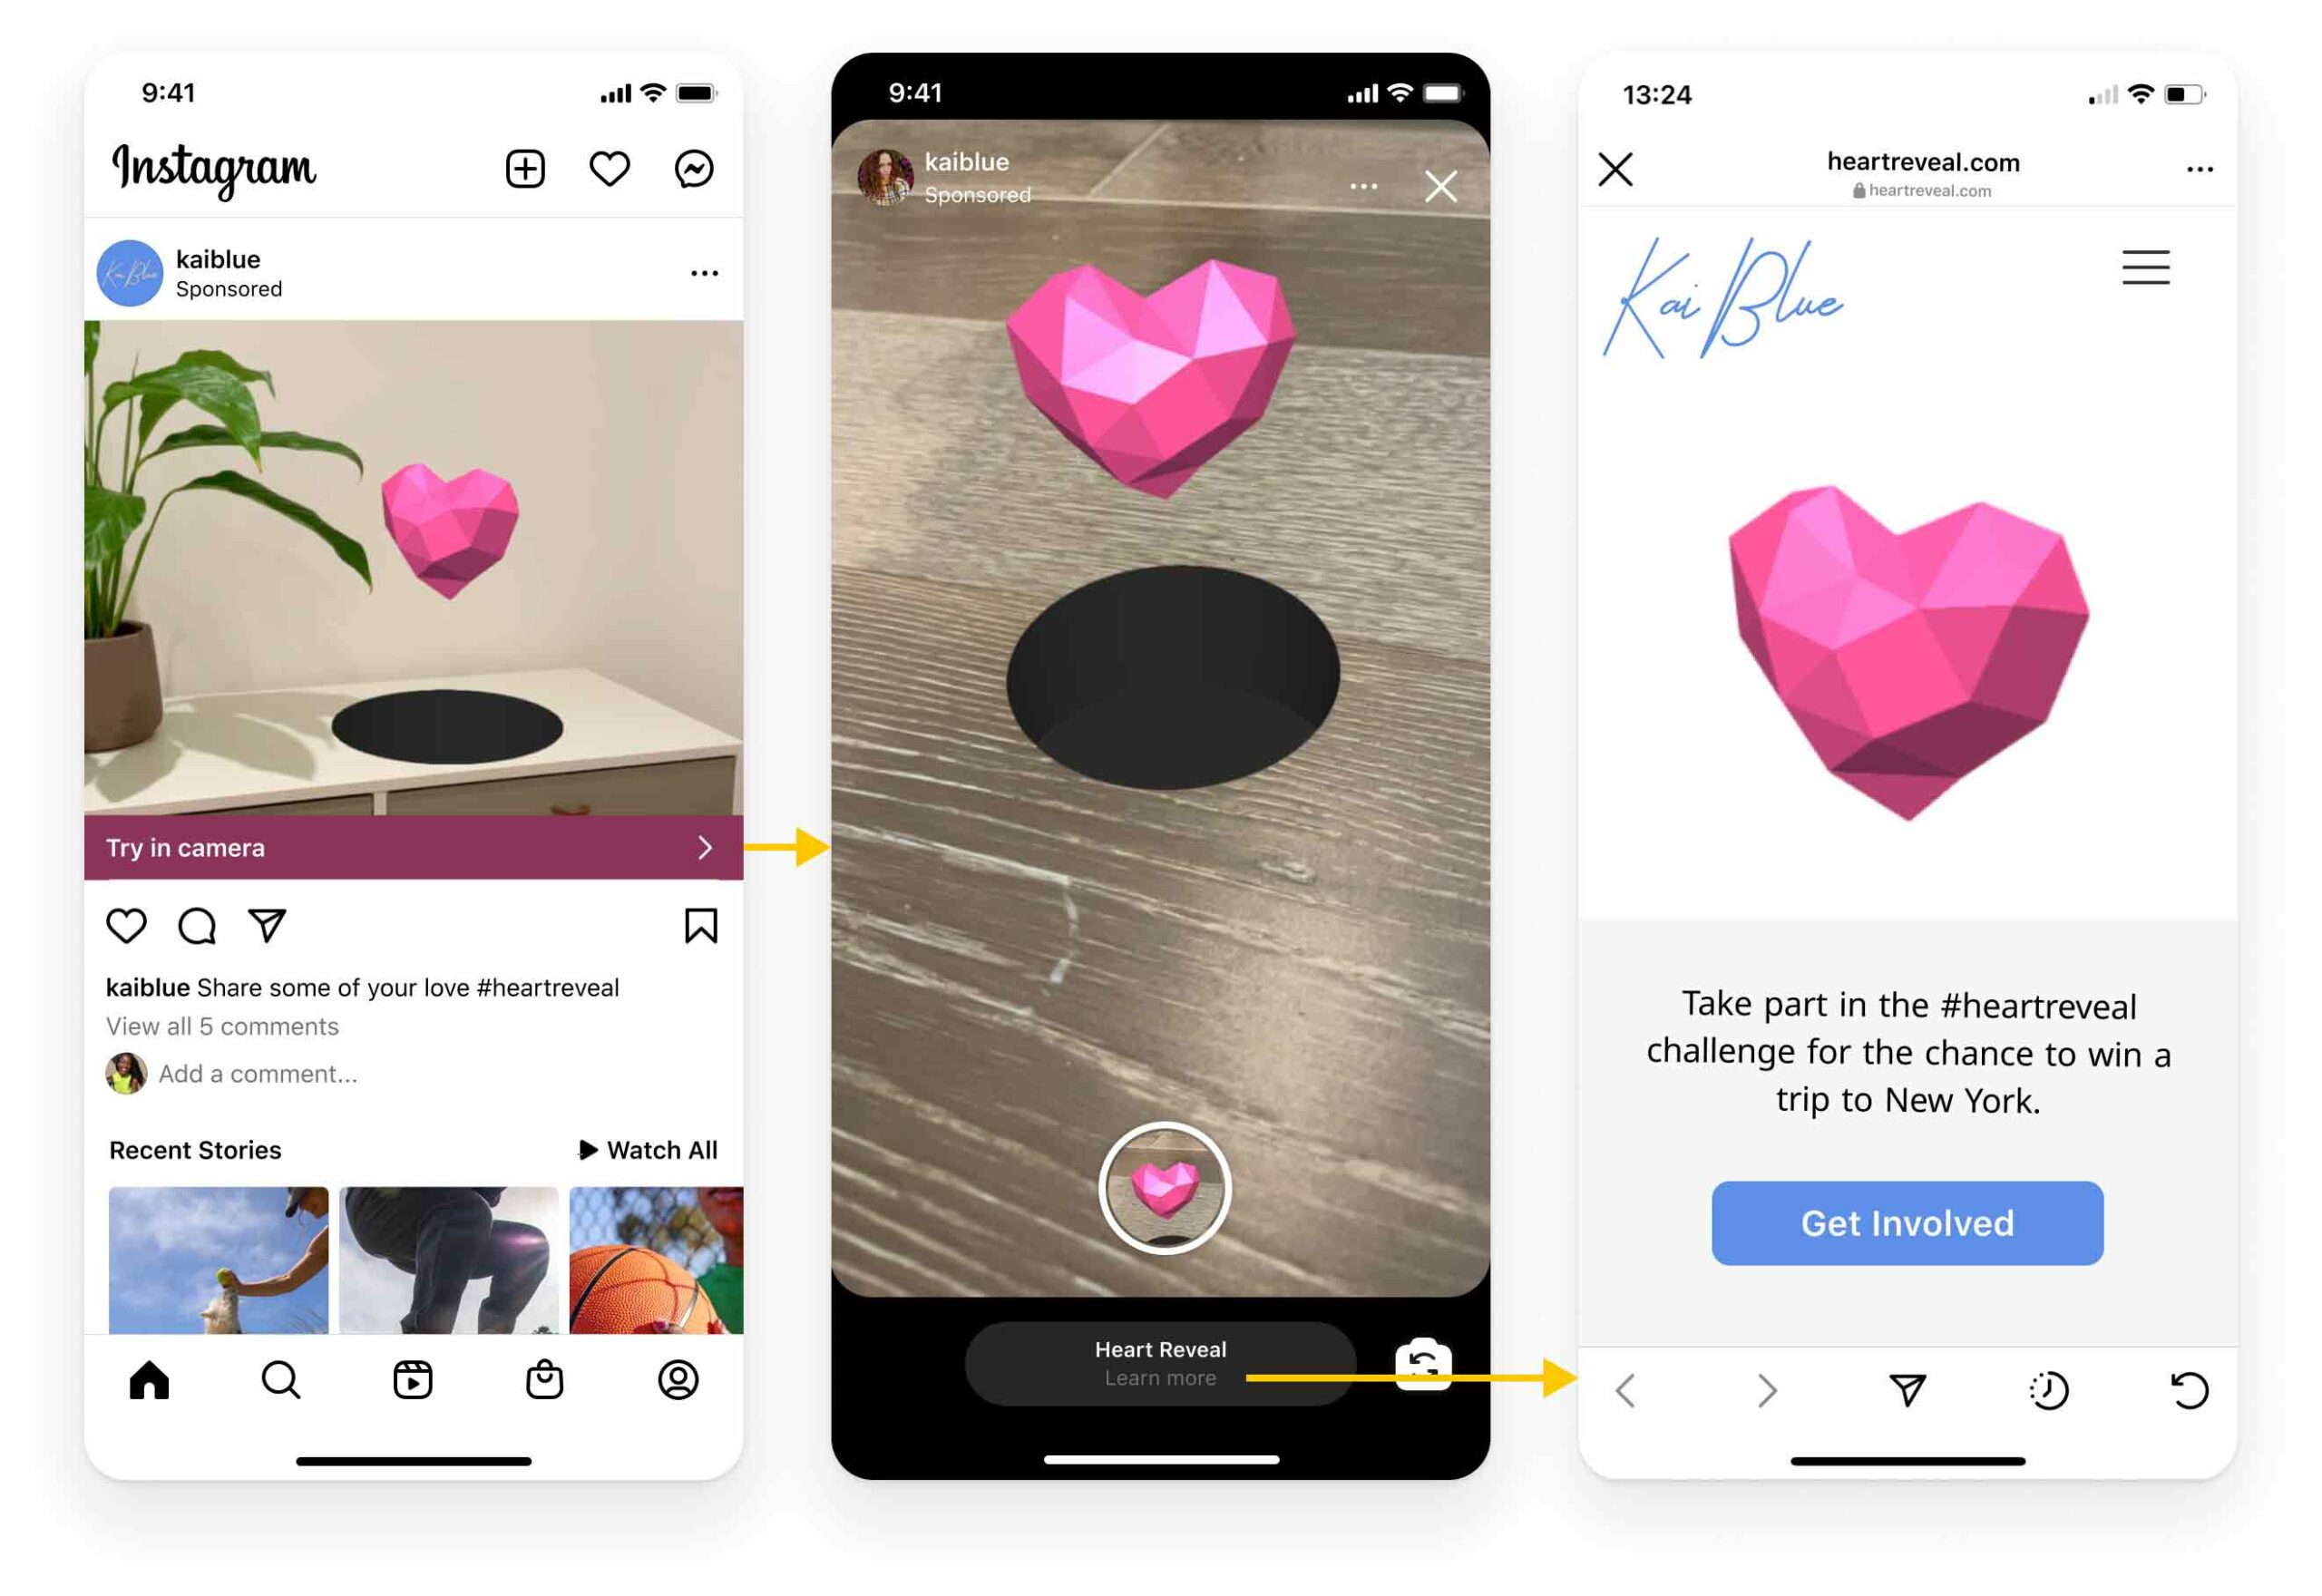 Instagram is now placing ads in your profile feed